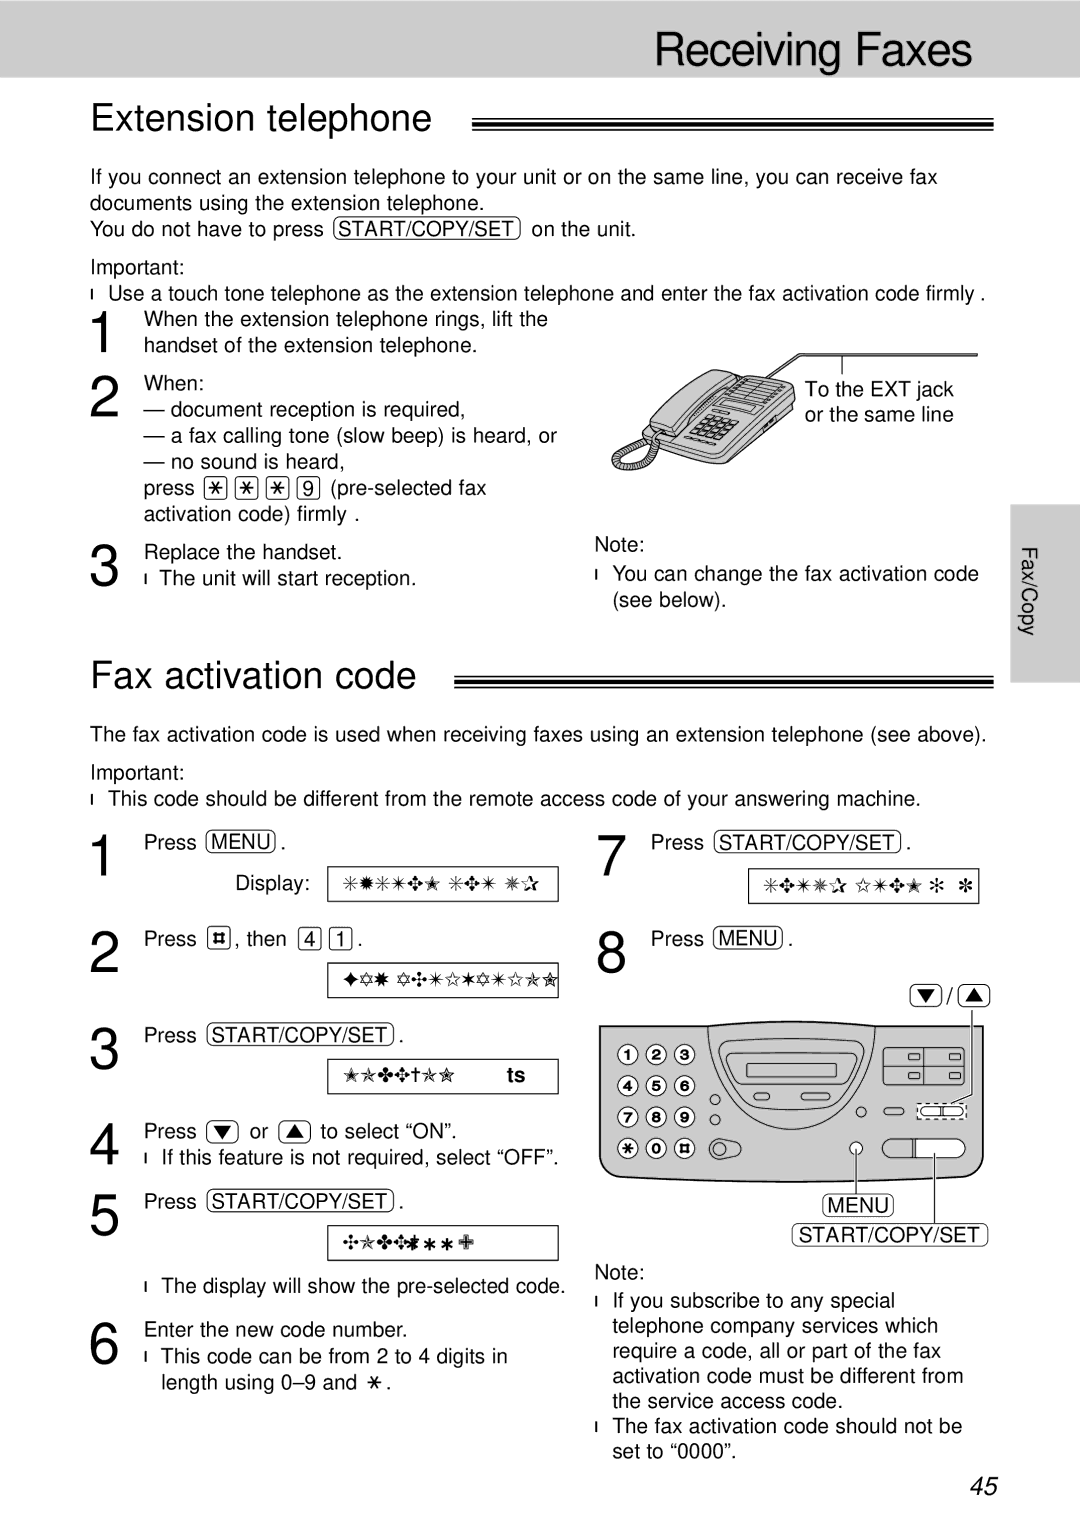 Panasonic KX-FT21HK operating instructions Extension telephone, Fax activation code 